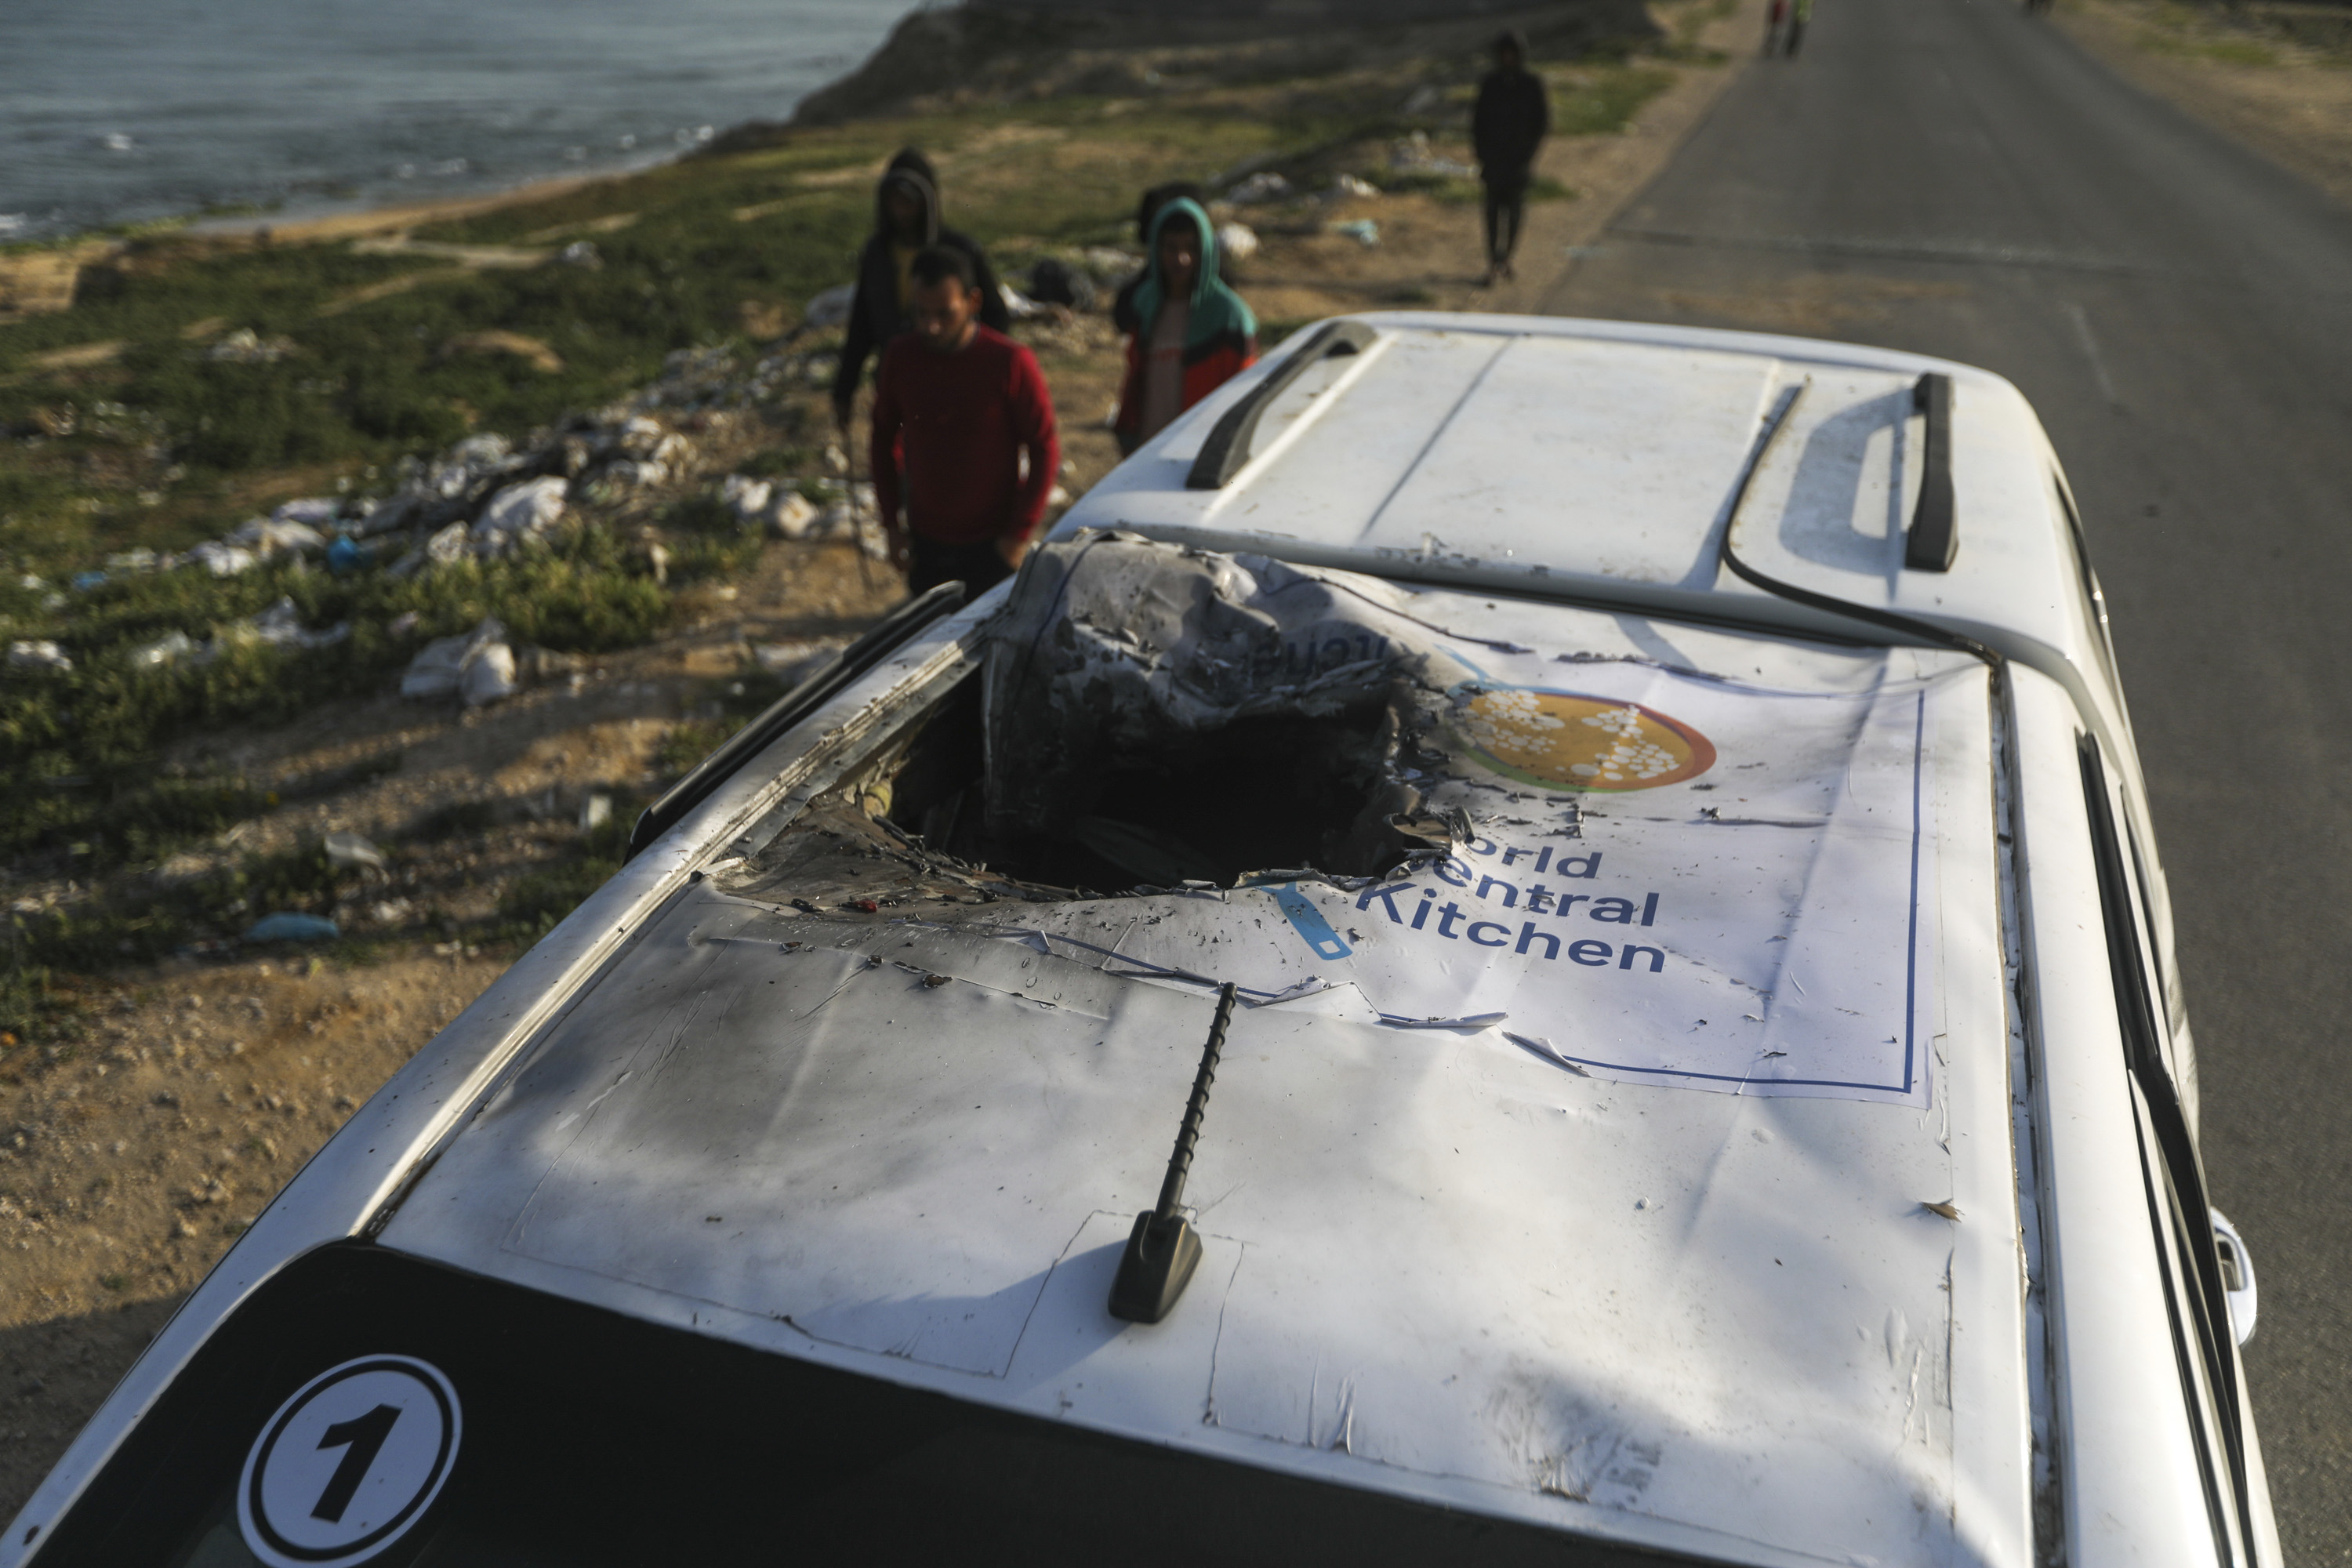 People inspect a vehicle with a logo of World Central Kitchen after it was hit by an Israeli airstrike in Deir al-Balah, Gaza, on Tuesday, April 2. 